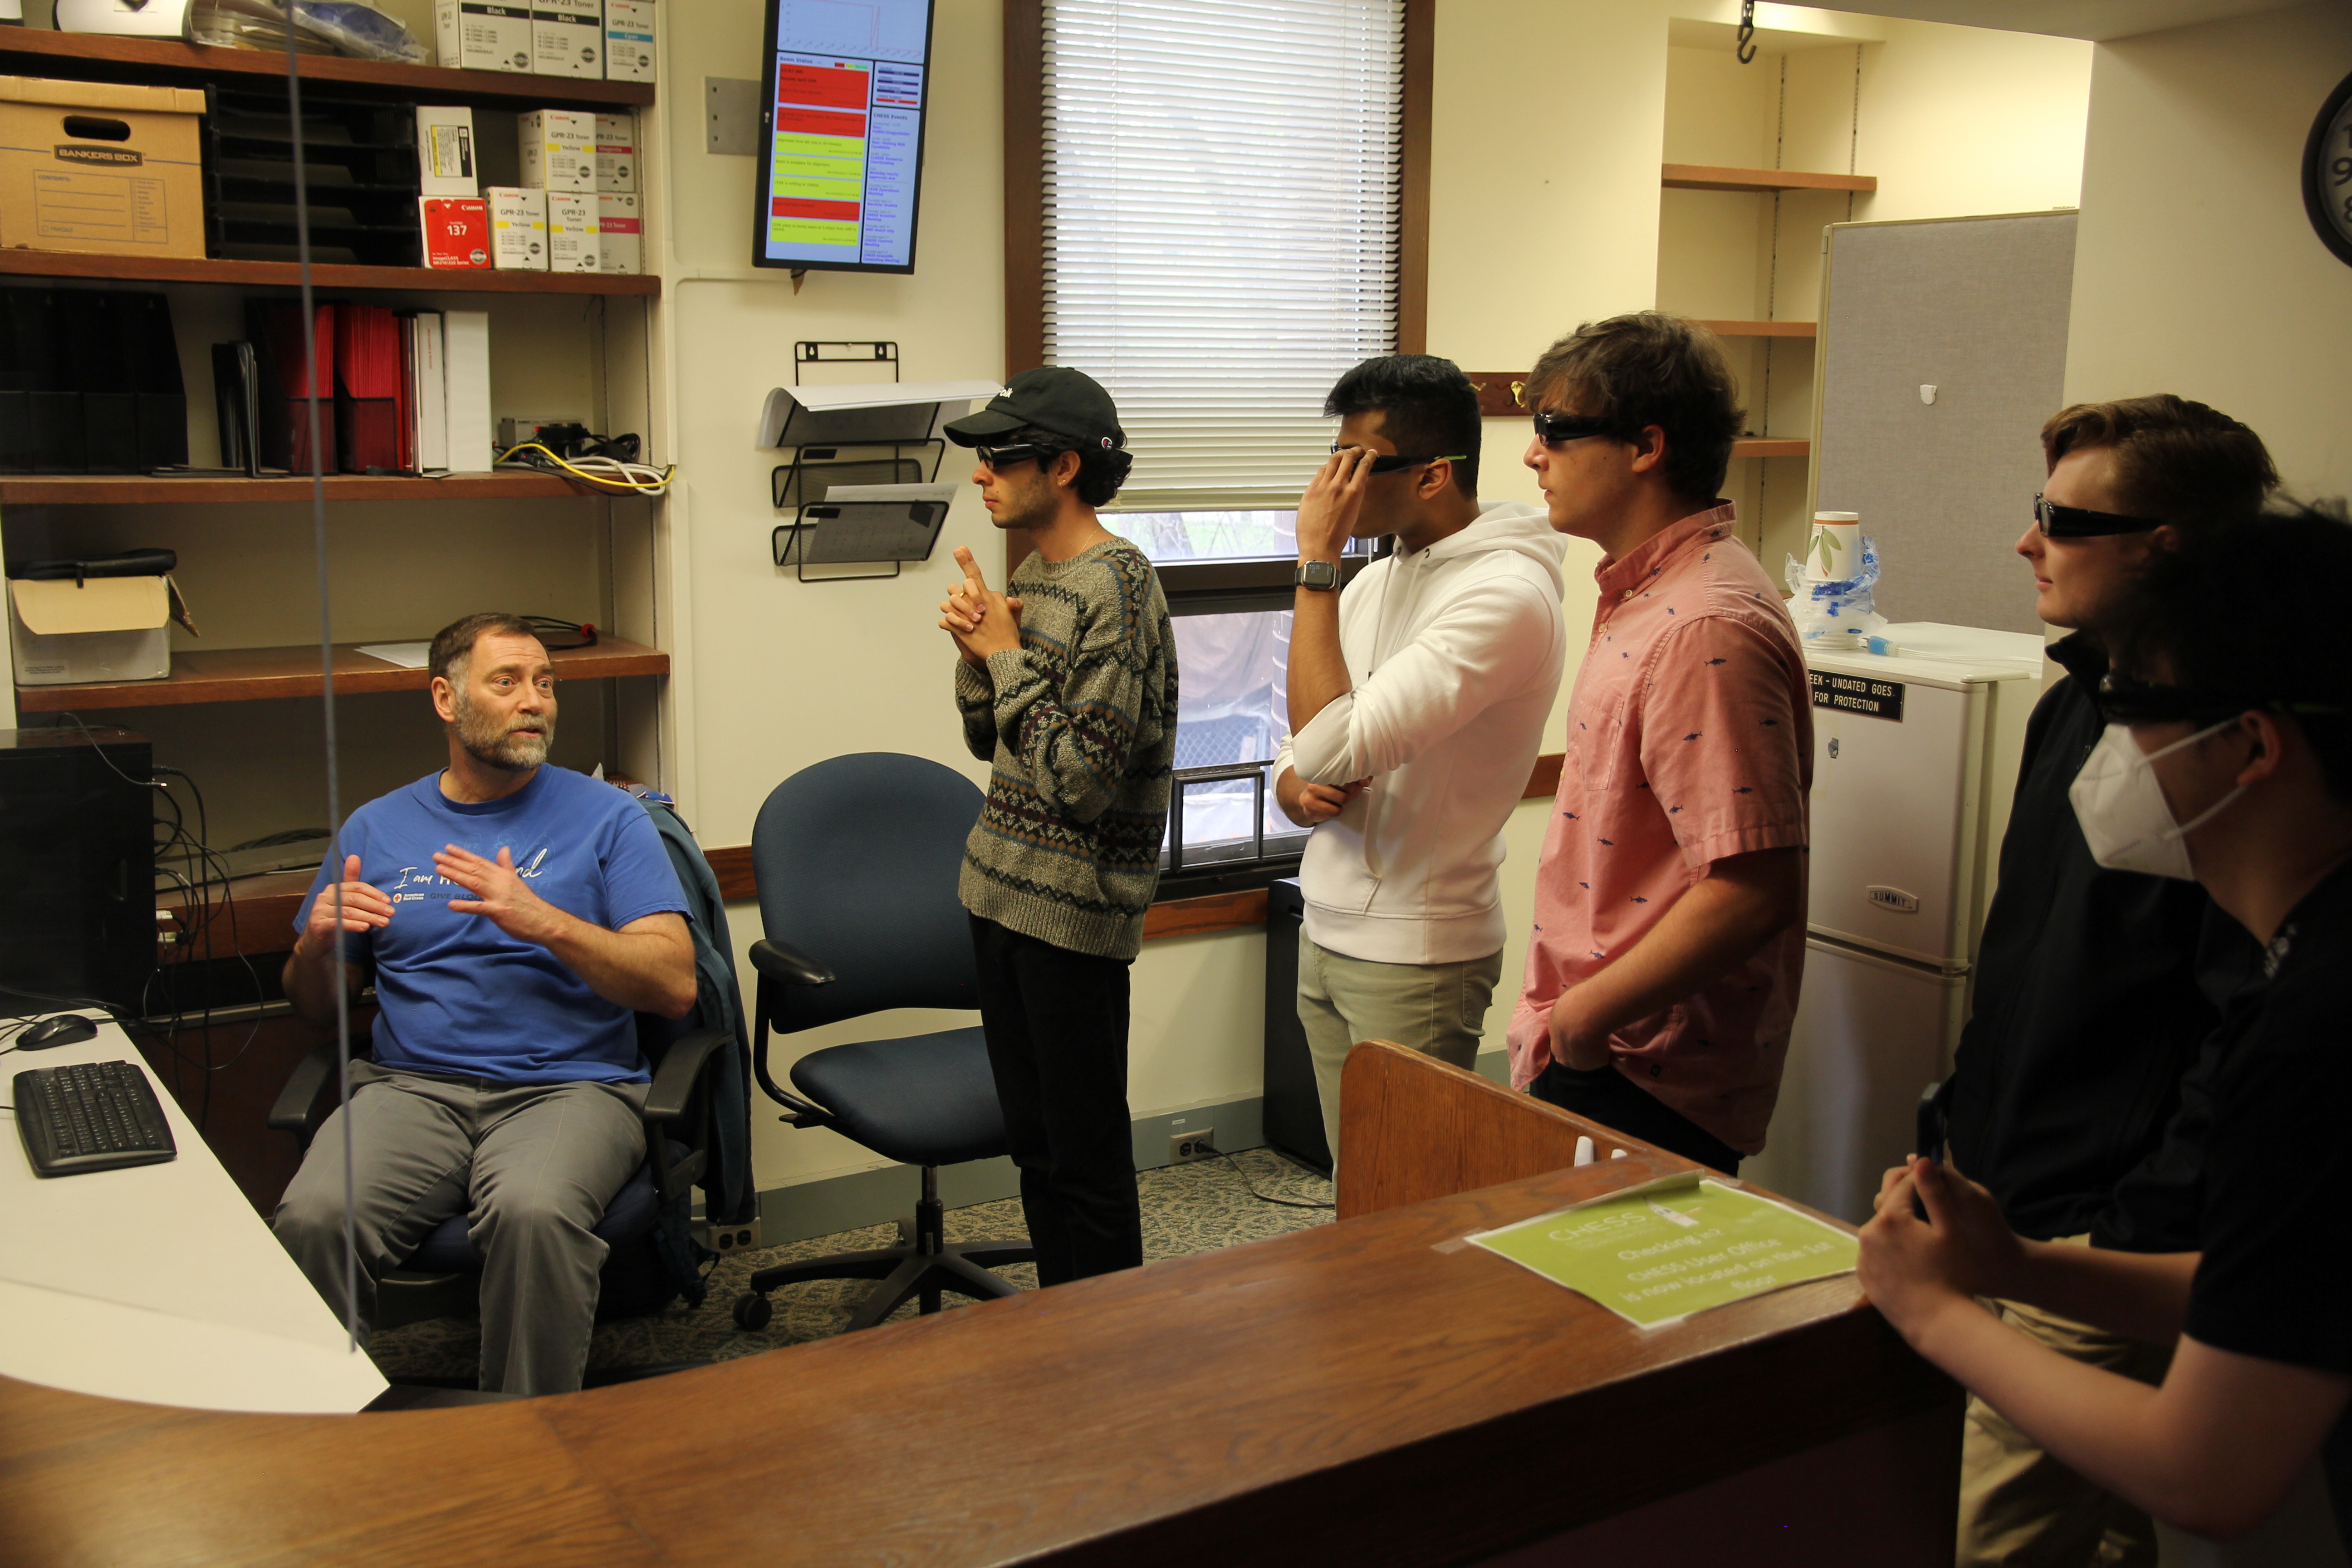 David Schuller shows students how 3D glasses are used to visualize protein structures in PyMOL